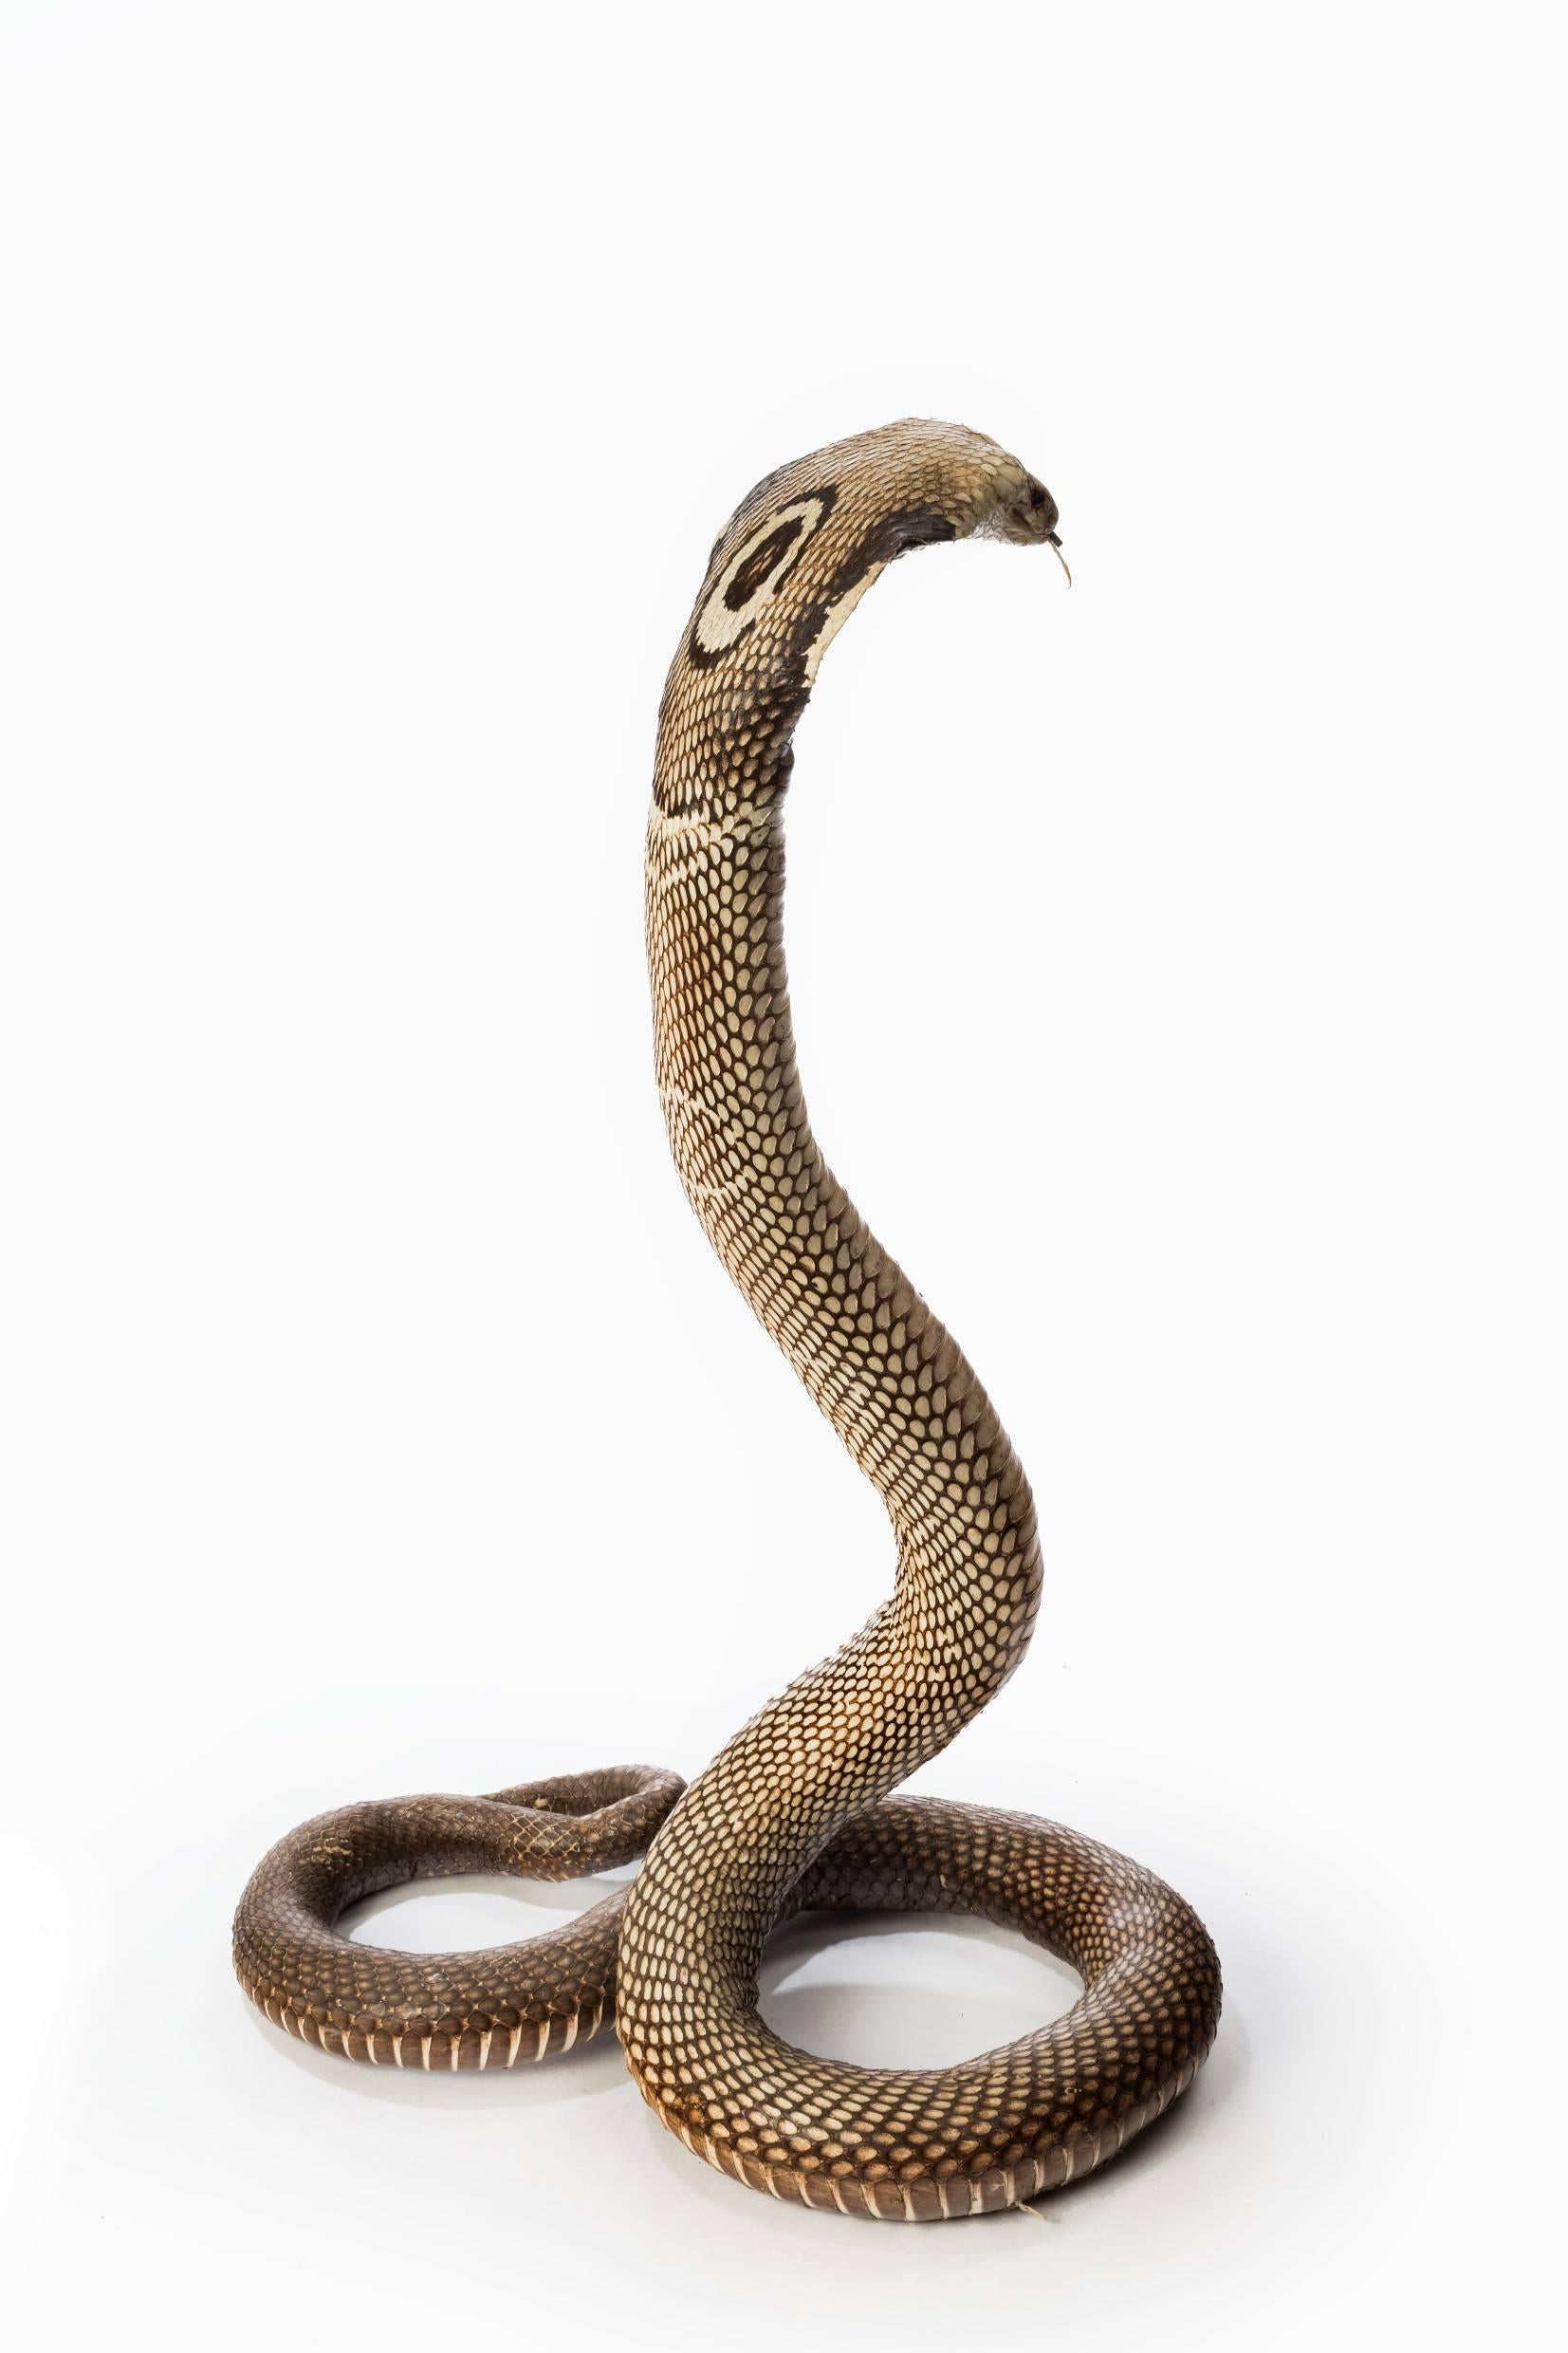 Victorian Antique Taxidermy Monocled Cobra